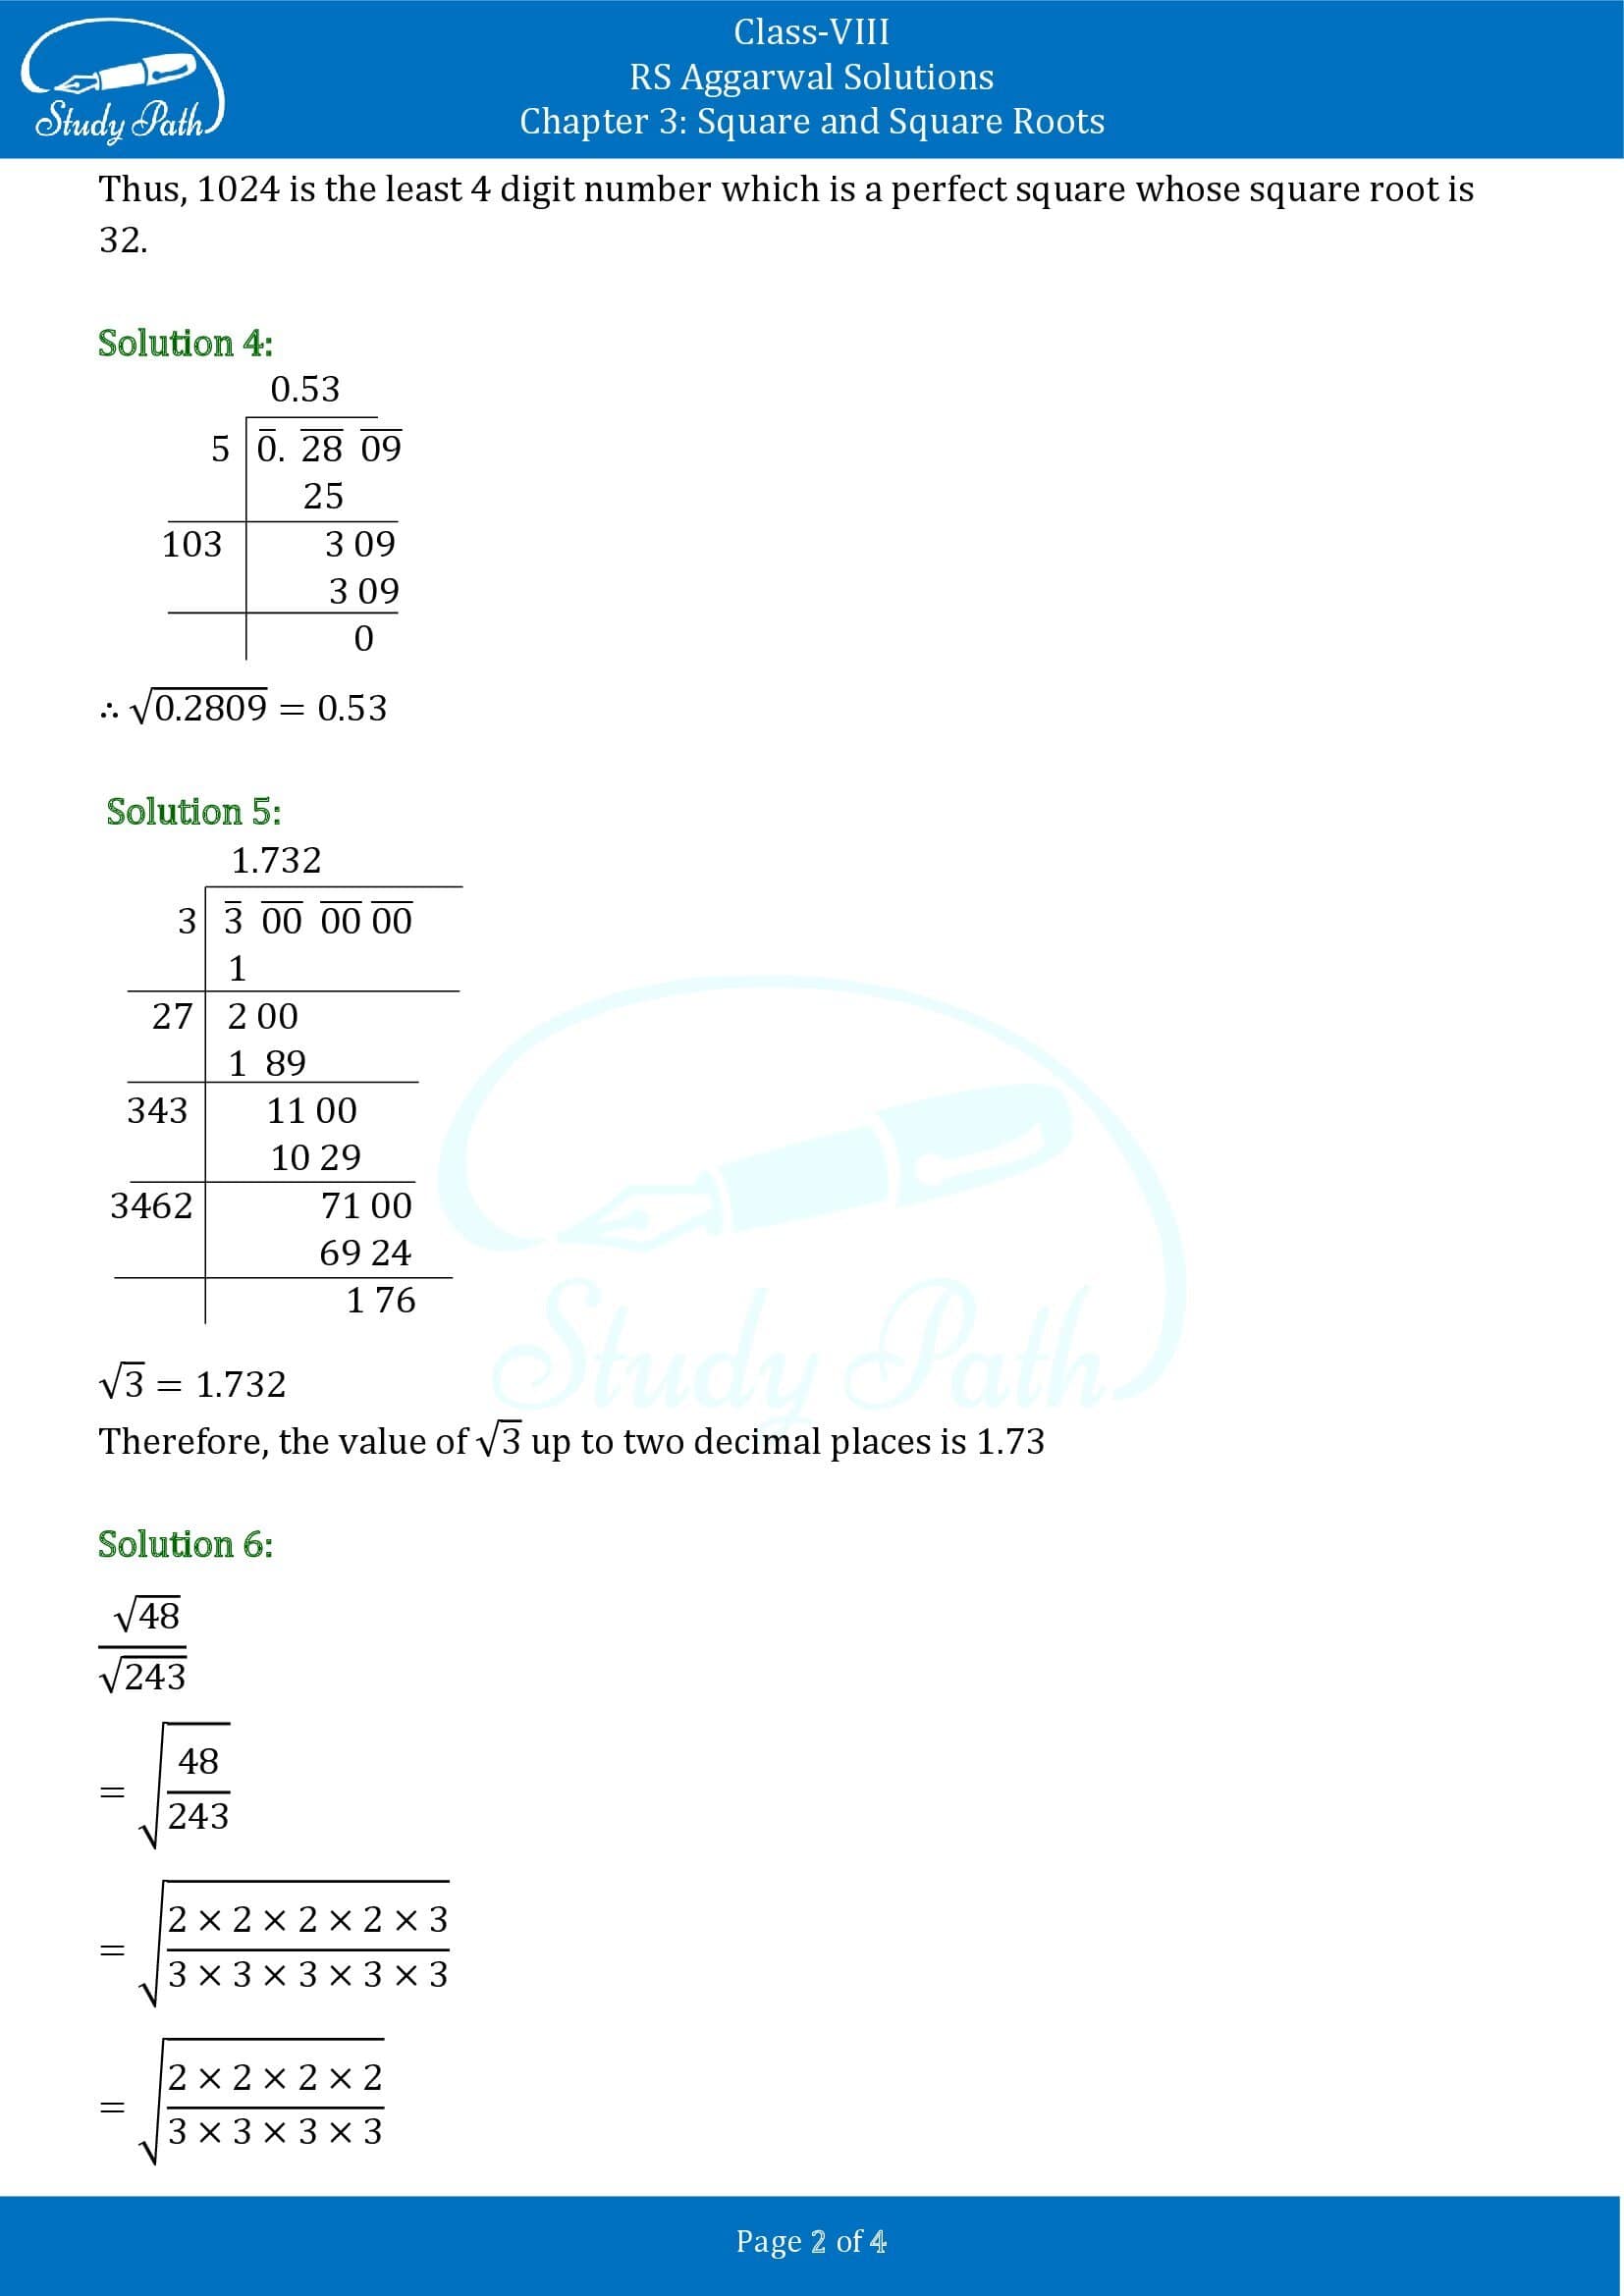 RS Aggarwal Solutions Class 8 Chapter 3 Square and Square Roots Test Paper 00002